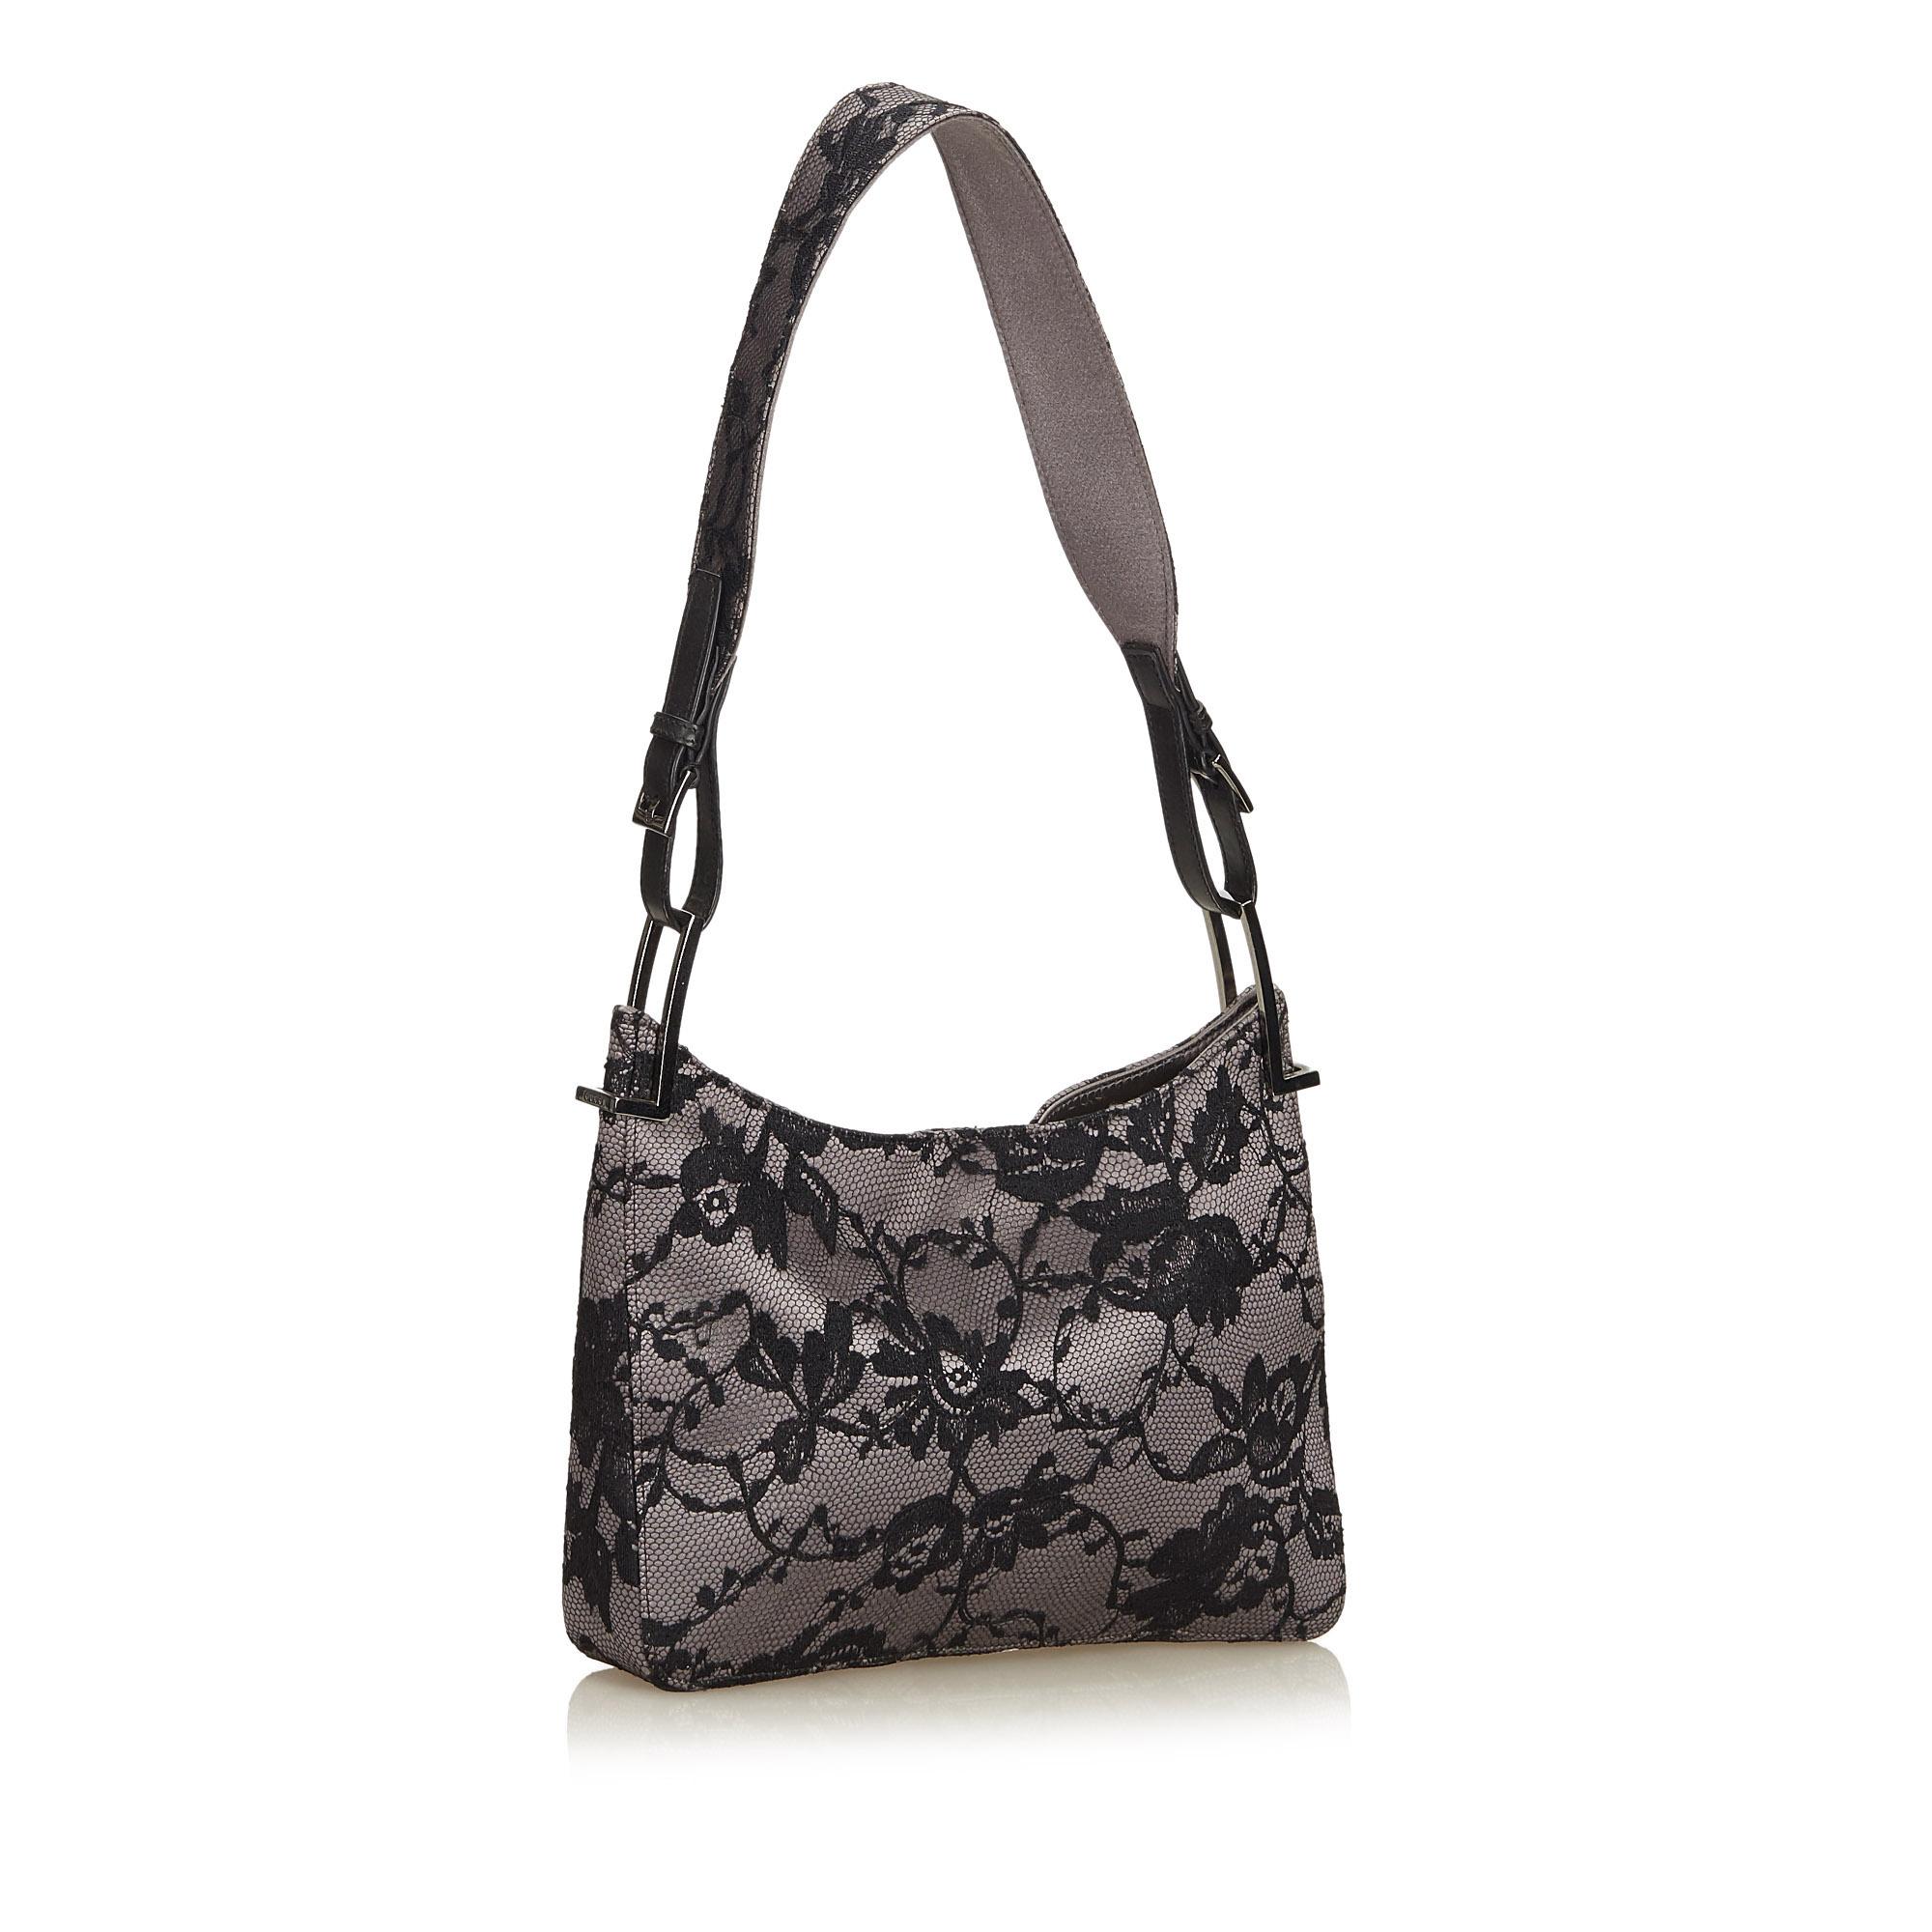 This baguette bag features a satin and lace body, flat shoulder strap, open top with magnetic snap closure, and an interior zip pocket.

It carries a AB condition rating.

Dimensions: 
Length 16.00 cm
Width 25.00 cm
Depth 4.50 cm
Shoulder Drop 25.50